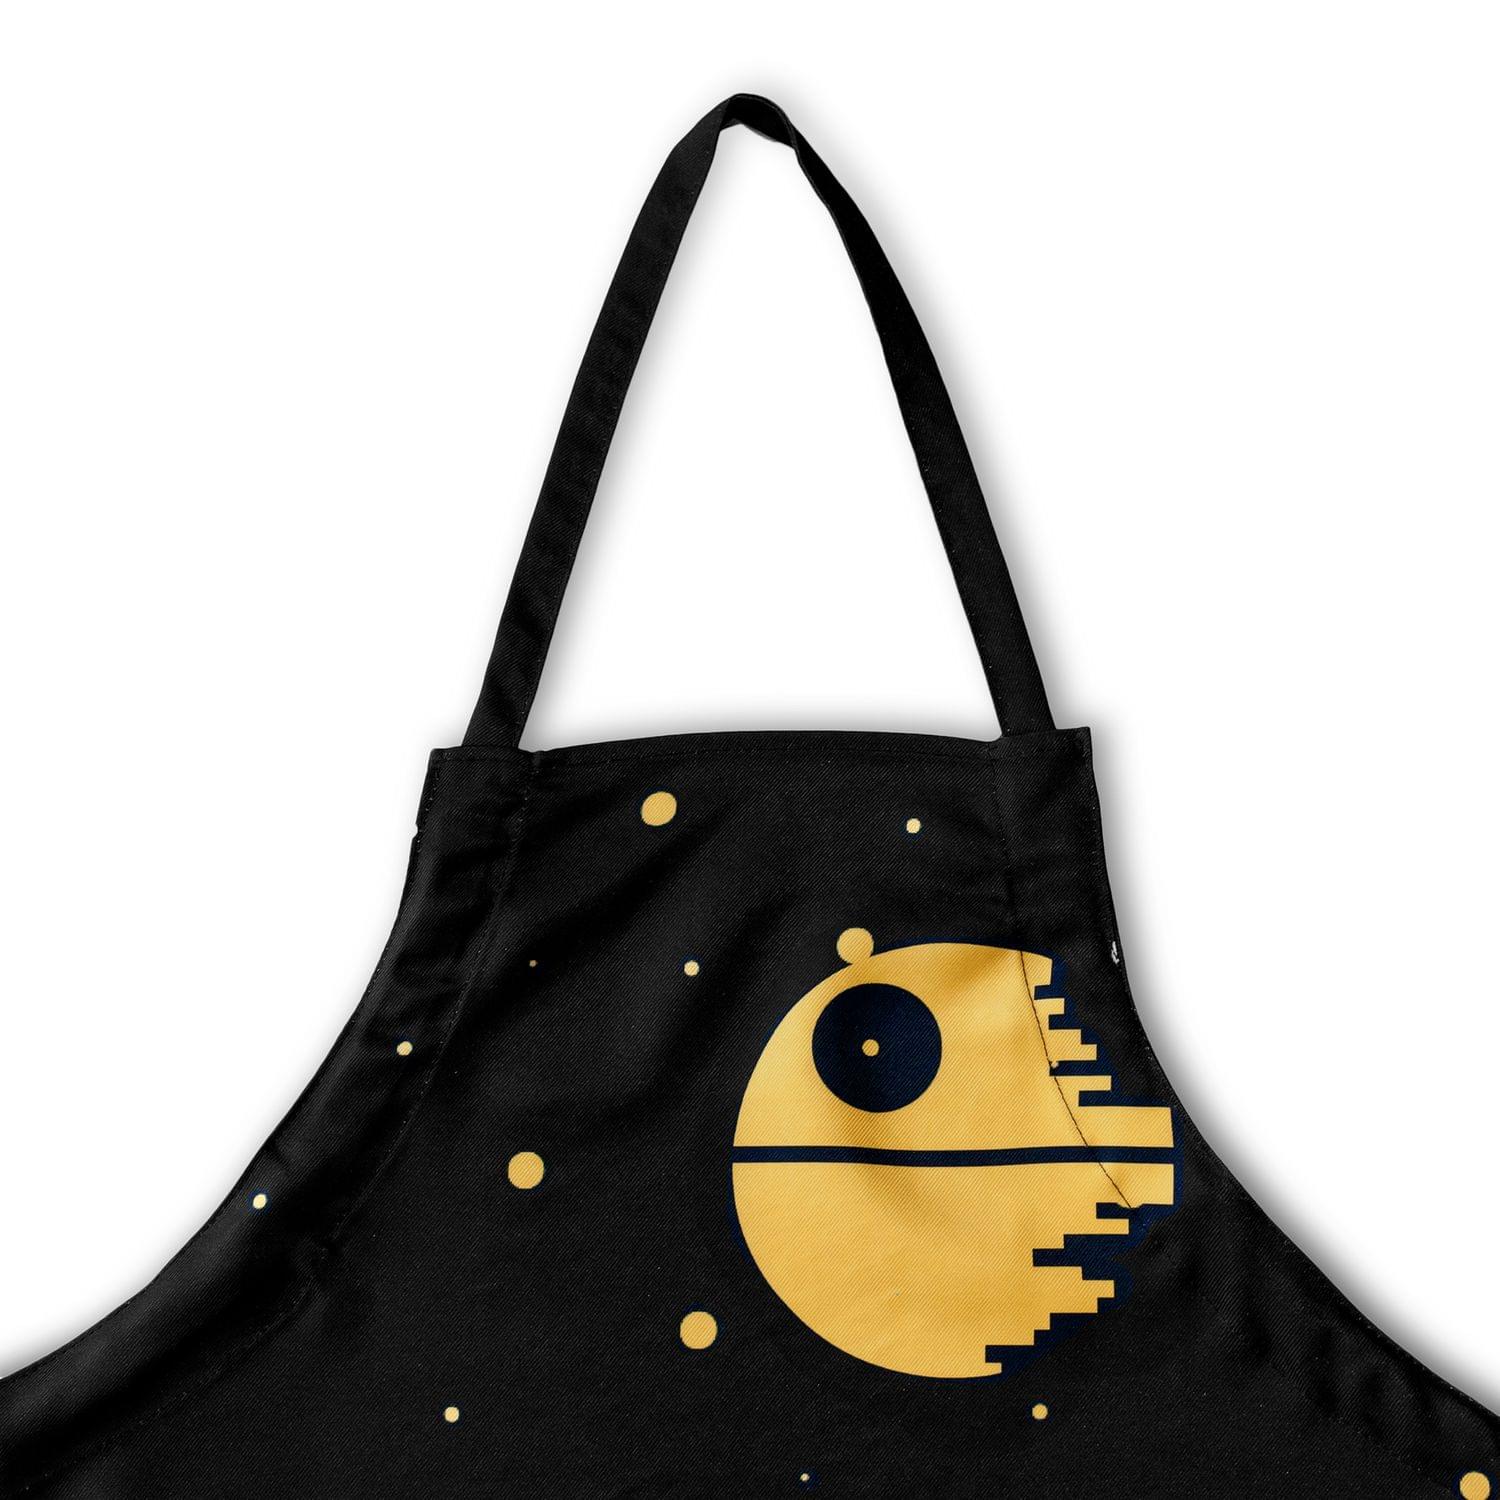 OFFICIAL Star Wars Kitchen Apron | Cooking Apron with Death Star & AT-AT Walkers